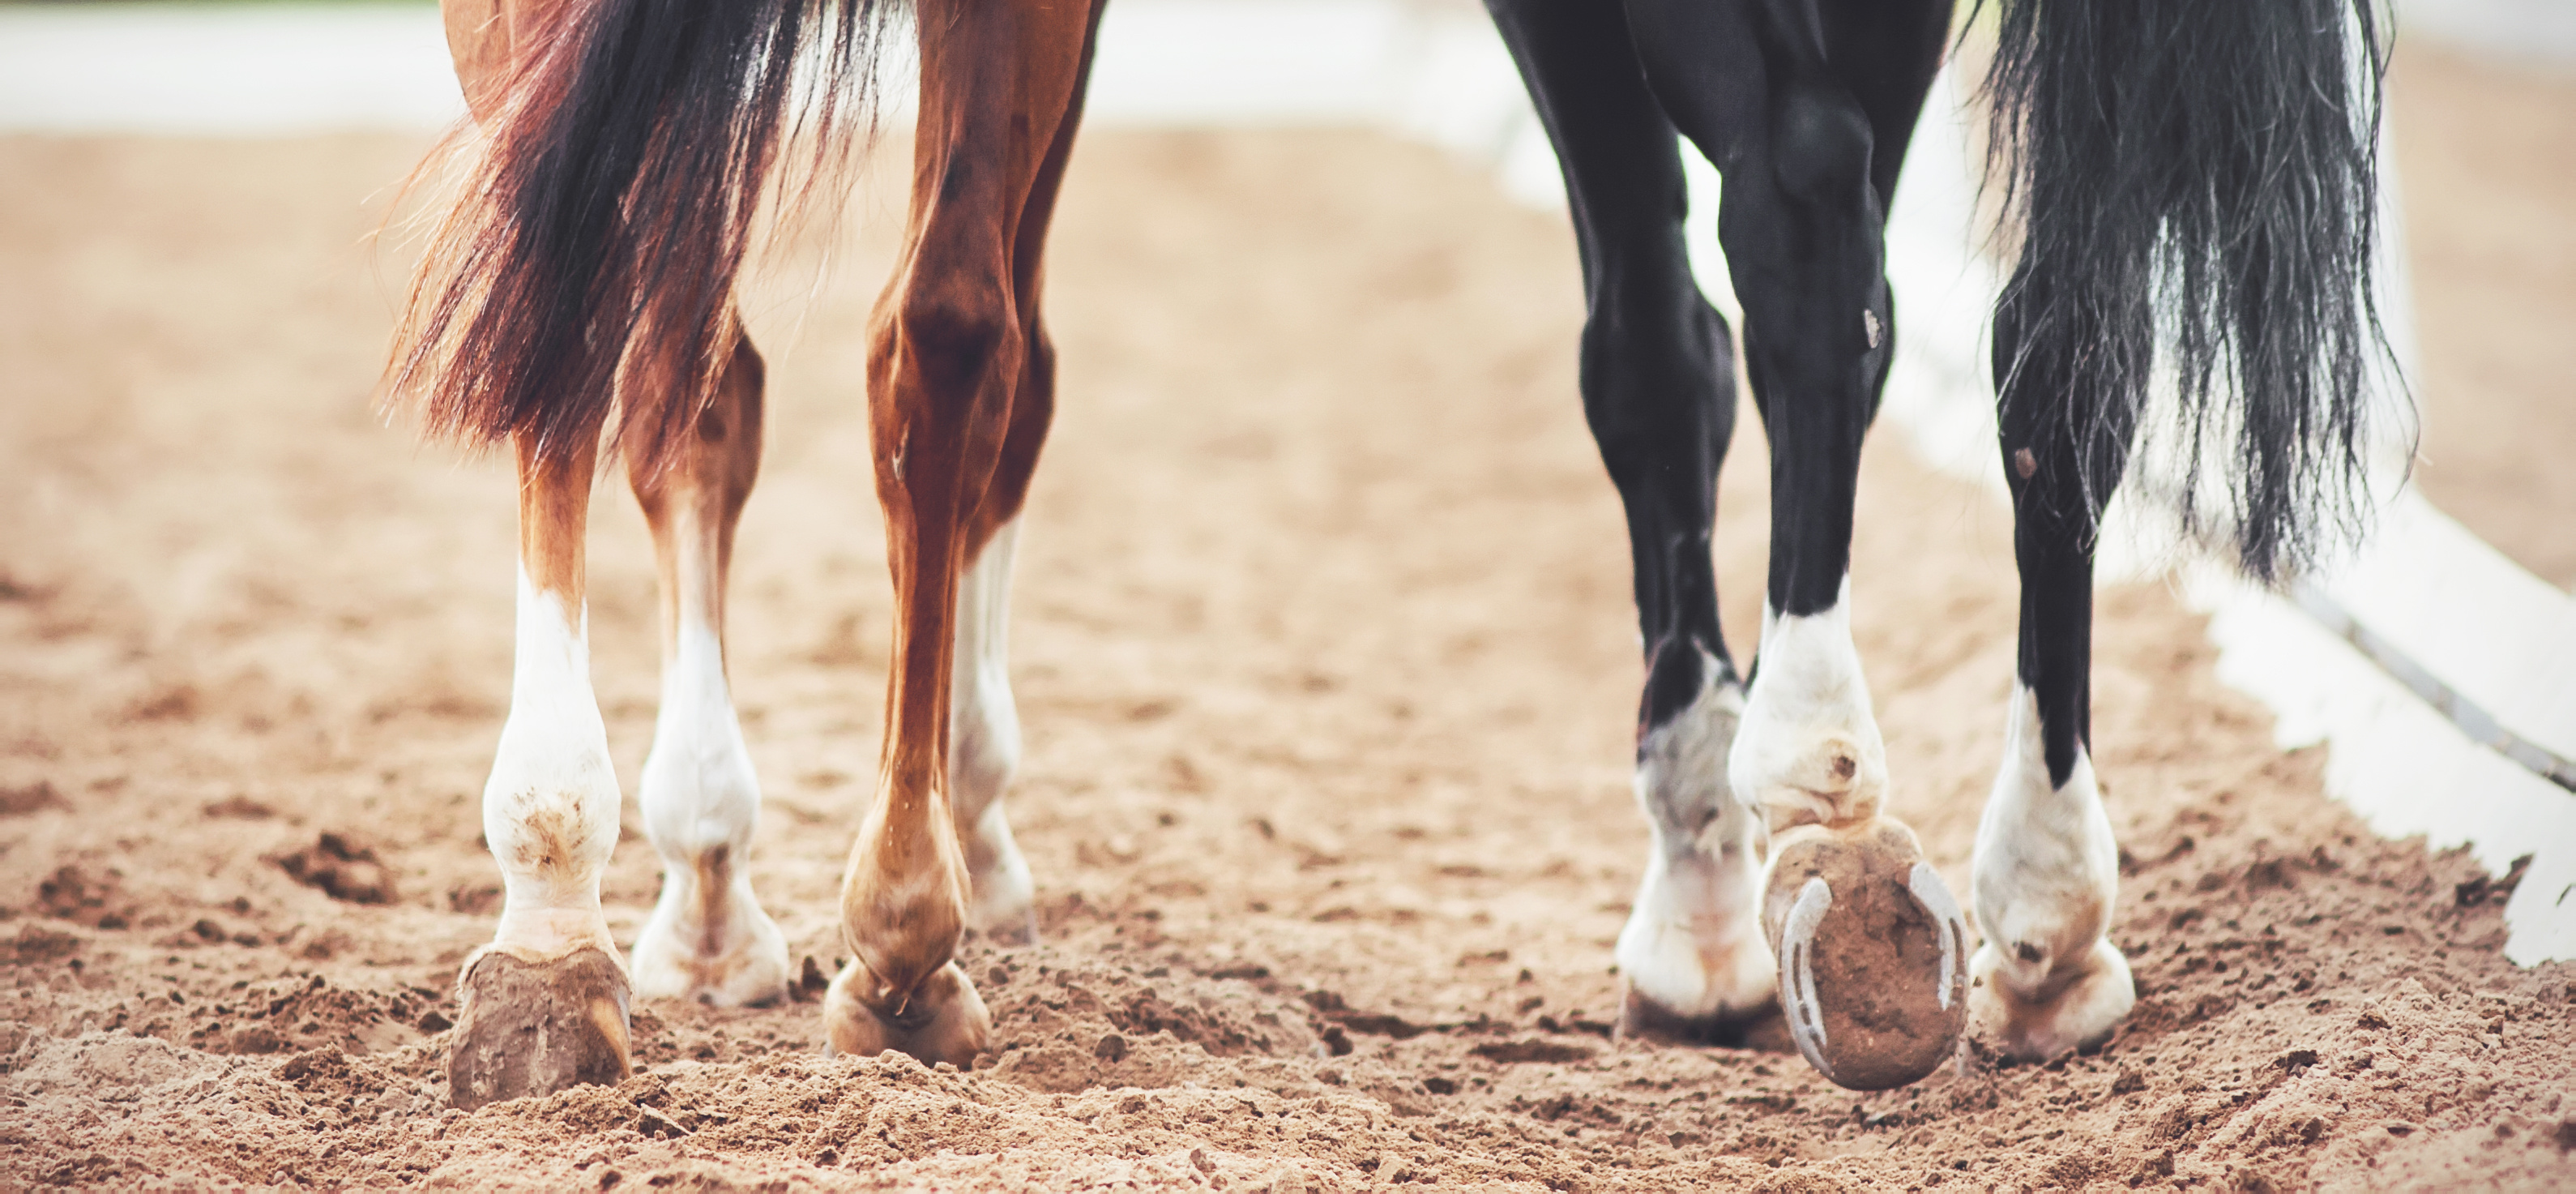 Close up of two horse's hind hooves as they walk through a dirt arena. 